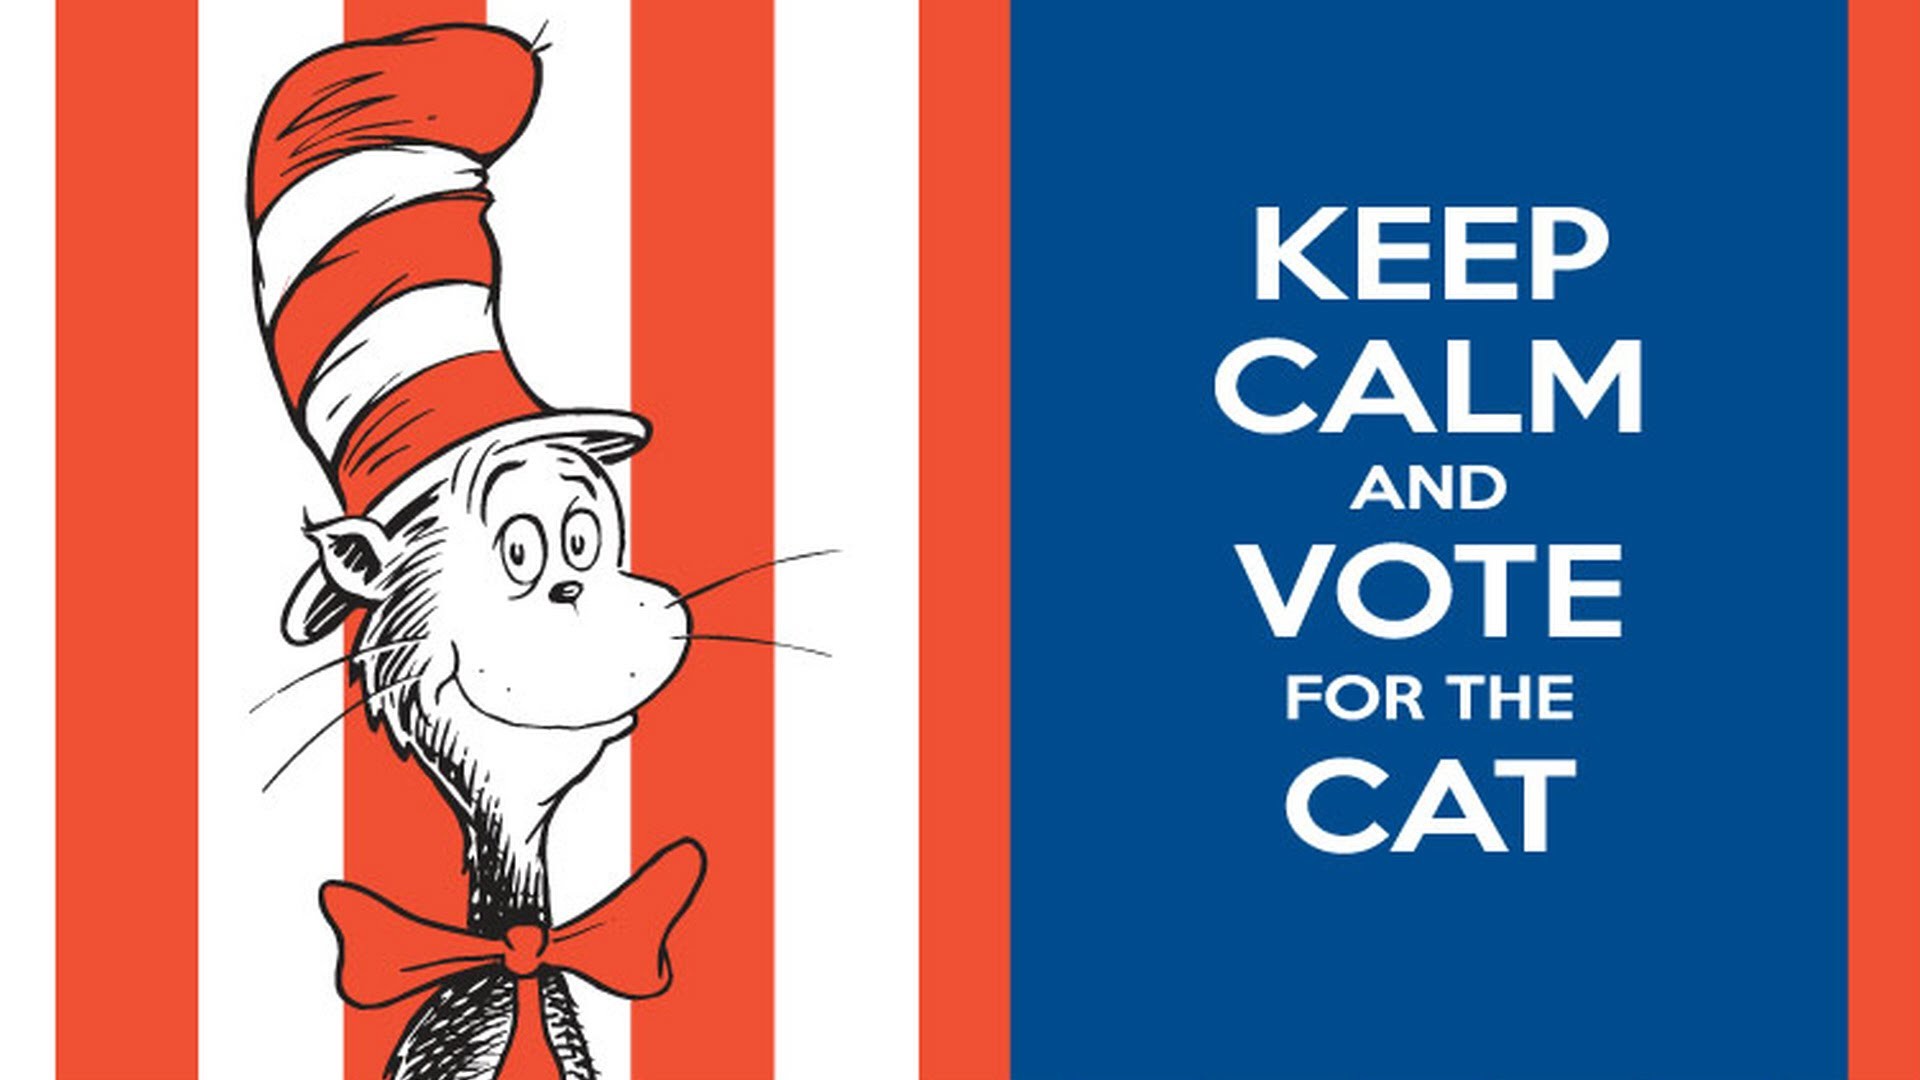 1920x1080 The Cat In The Hat For President Ceremony On Board Carnival Magic Cruise  Ship with VP's Thing 1 & 2